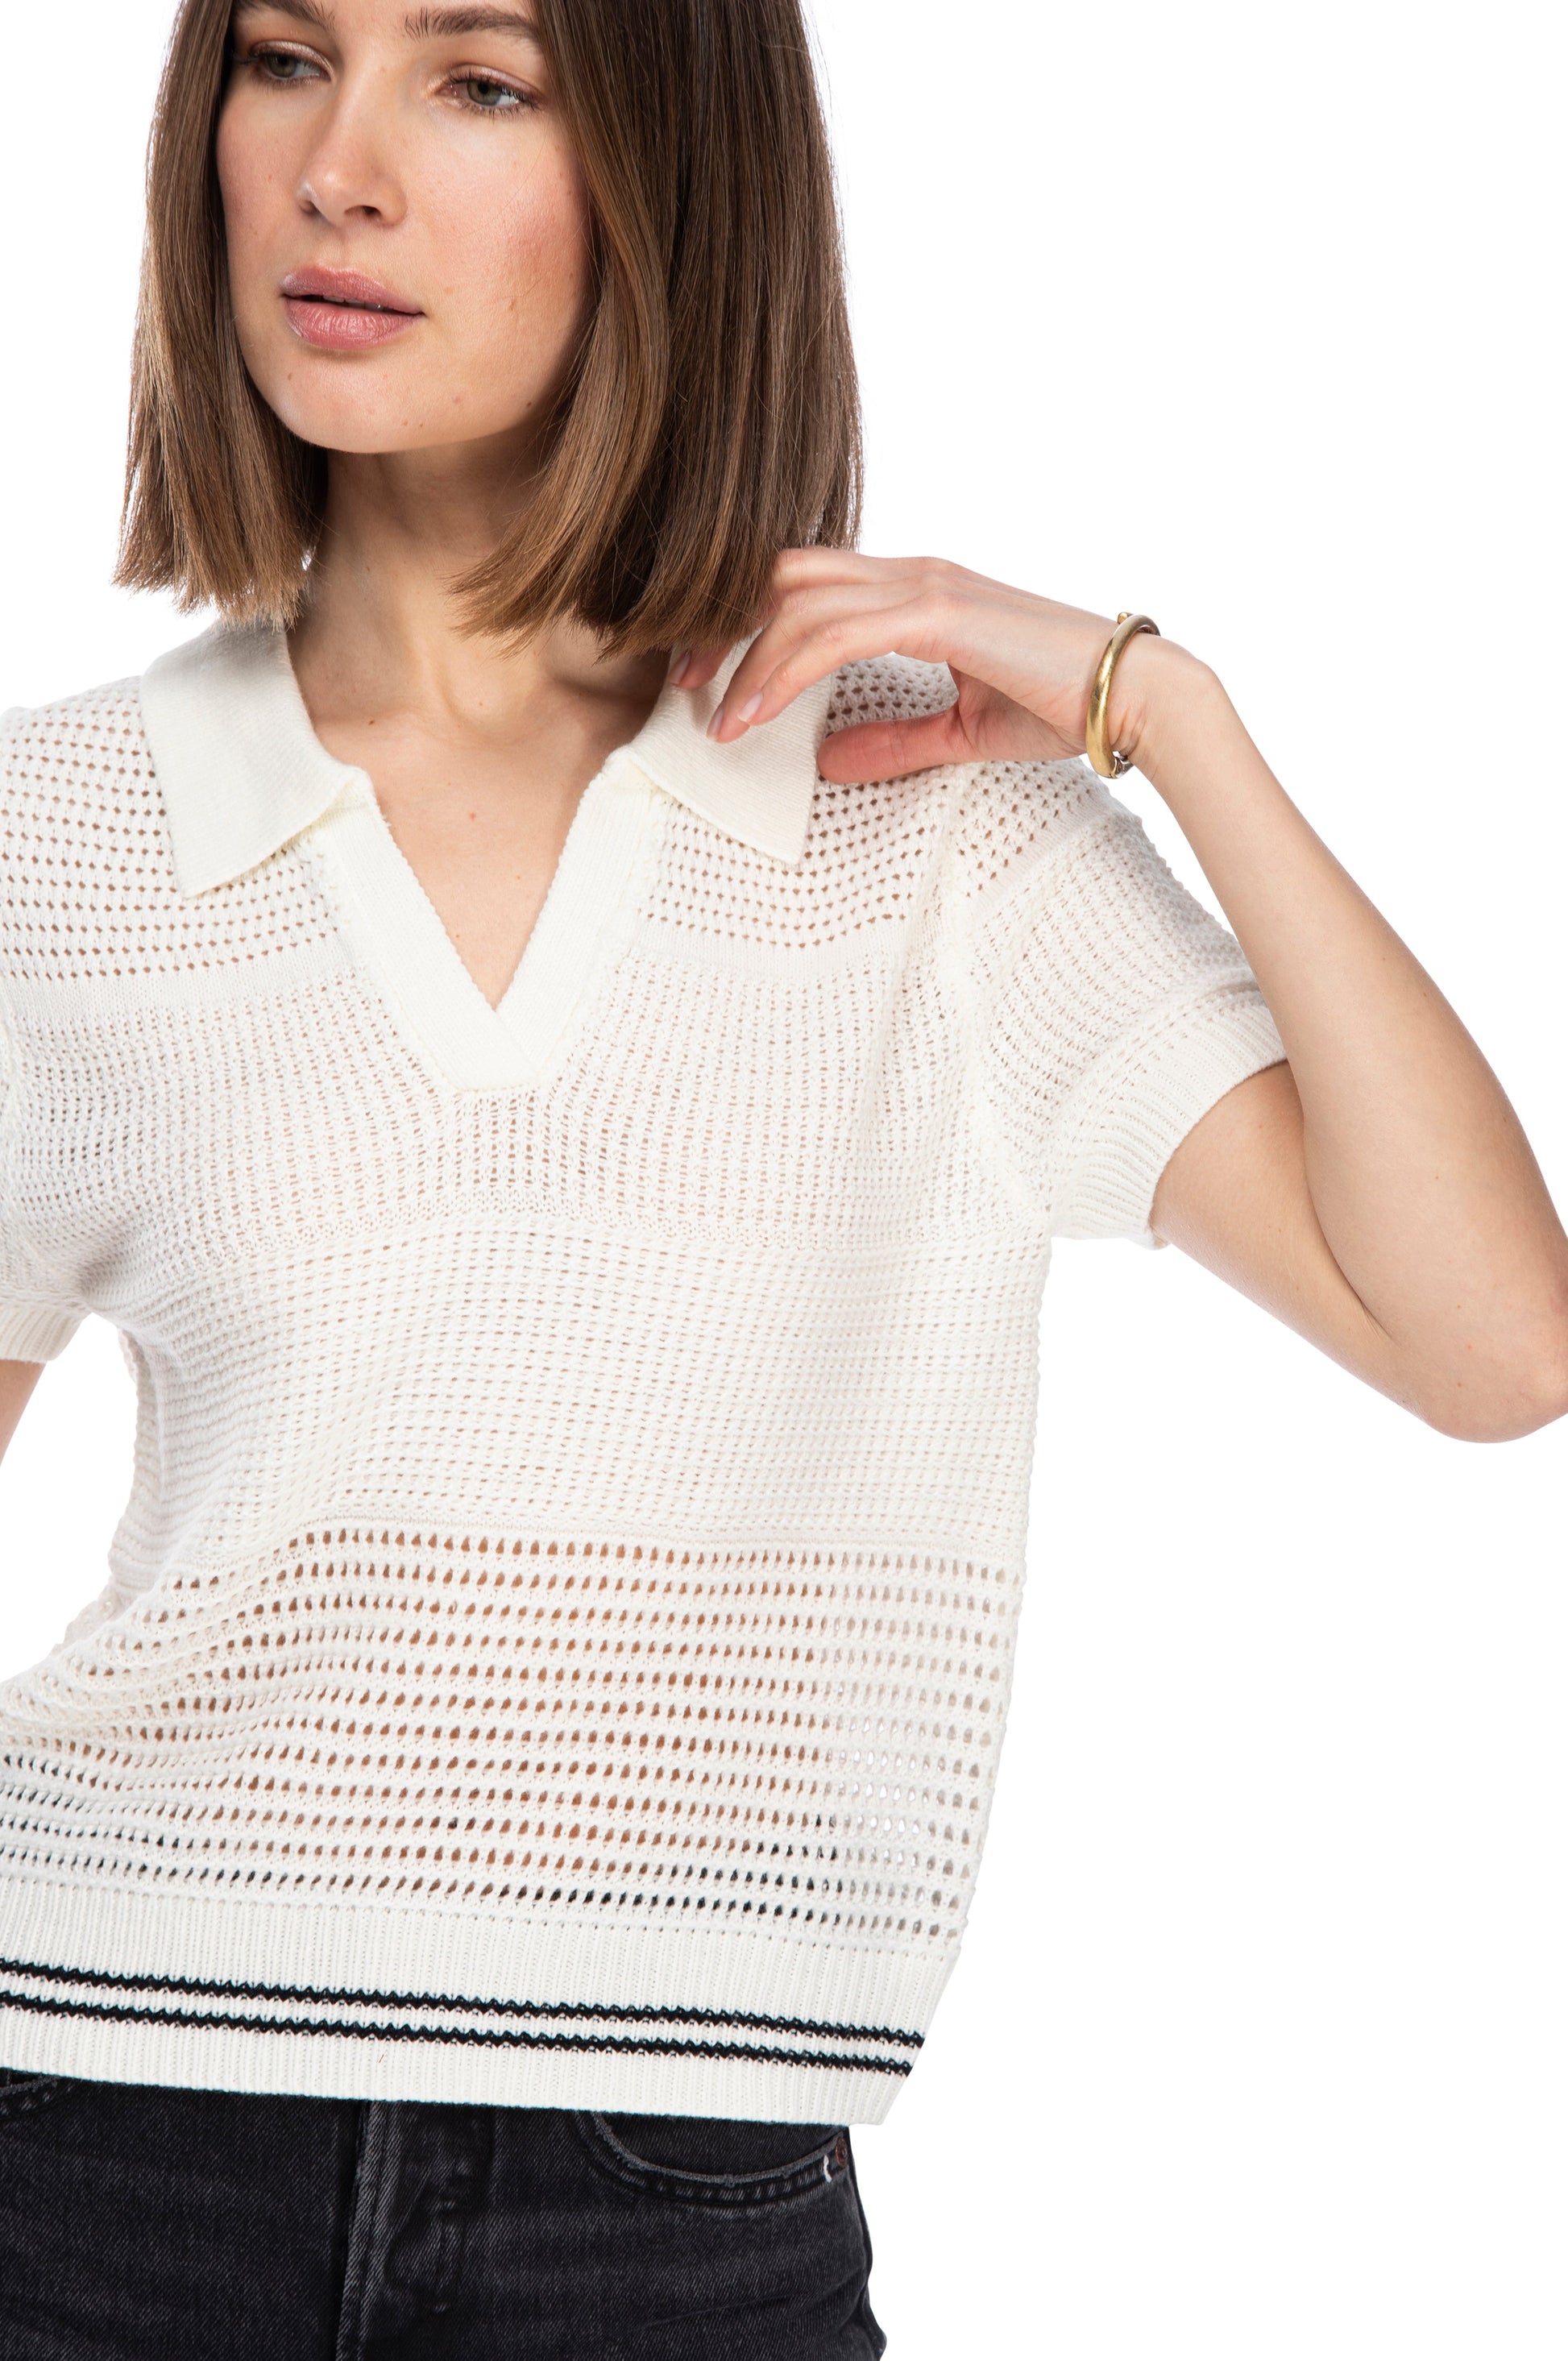 A woman in a white POLO OPEN WEAVE SWEATER top with a collar poses confidently, her hand resting on her shoulder.